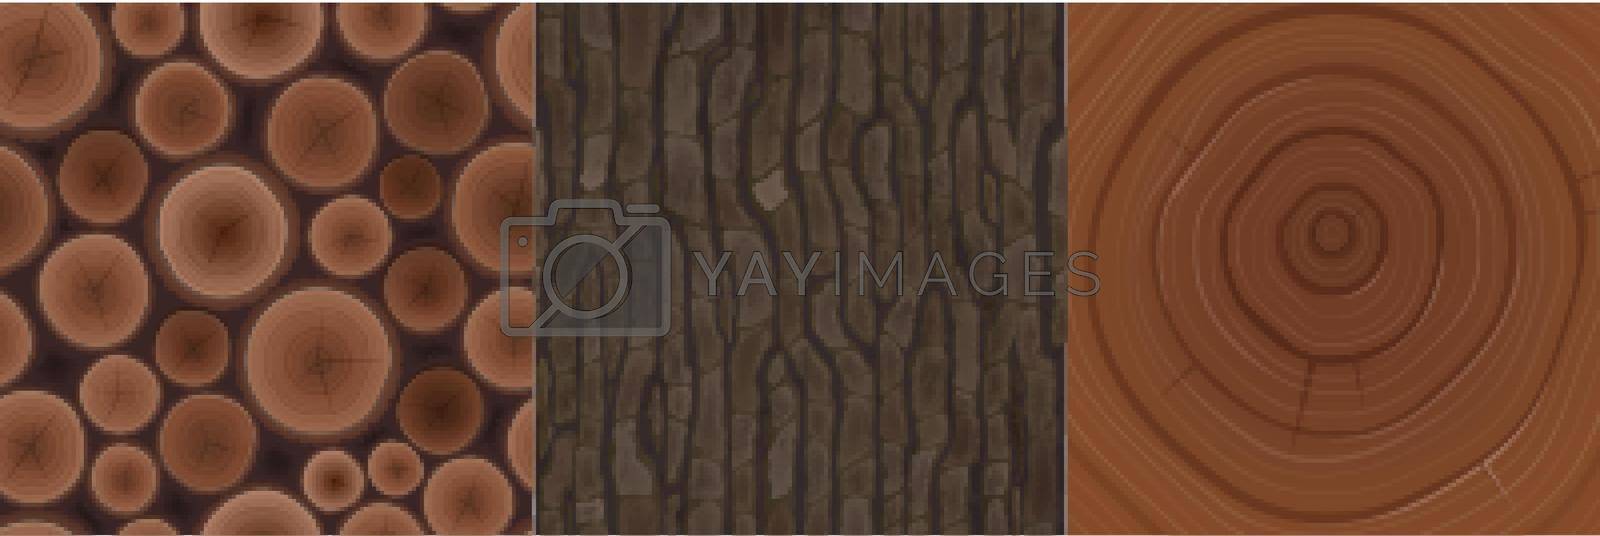 Royalty free image of Wooden textures for game, tree bark woodpile cut by vectorart